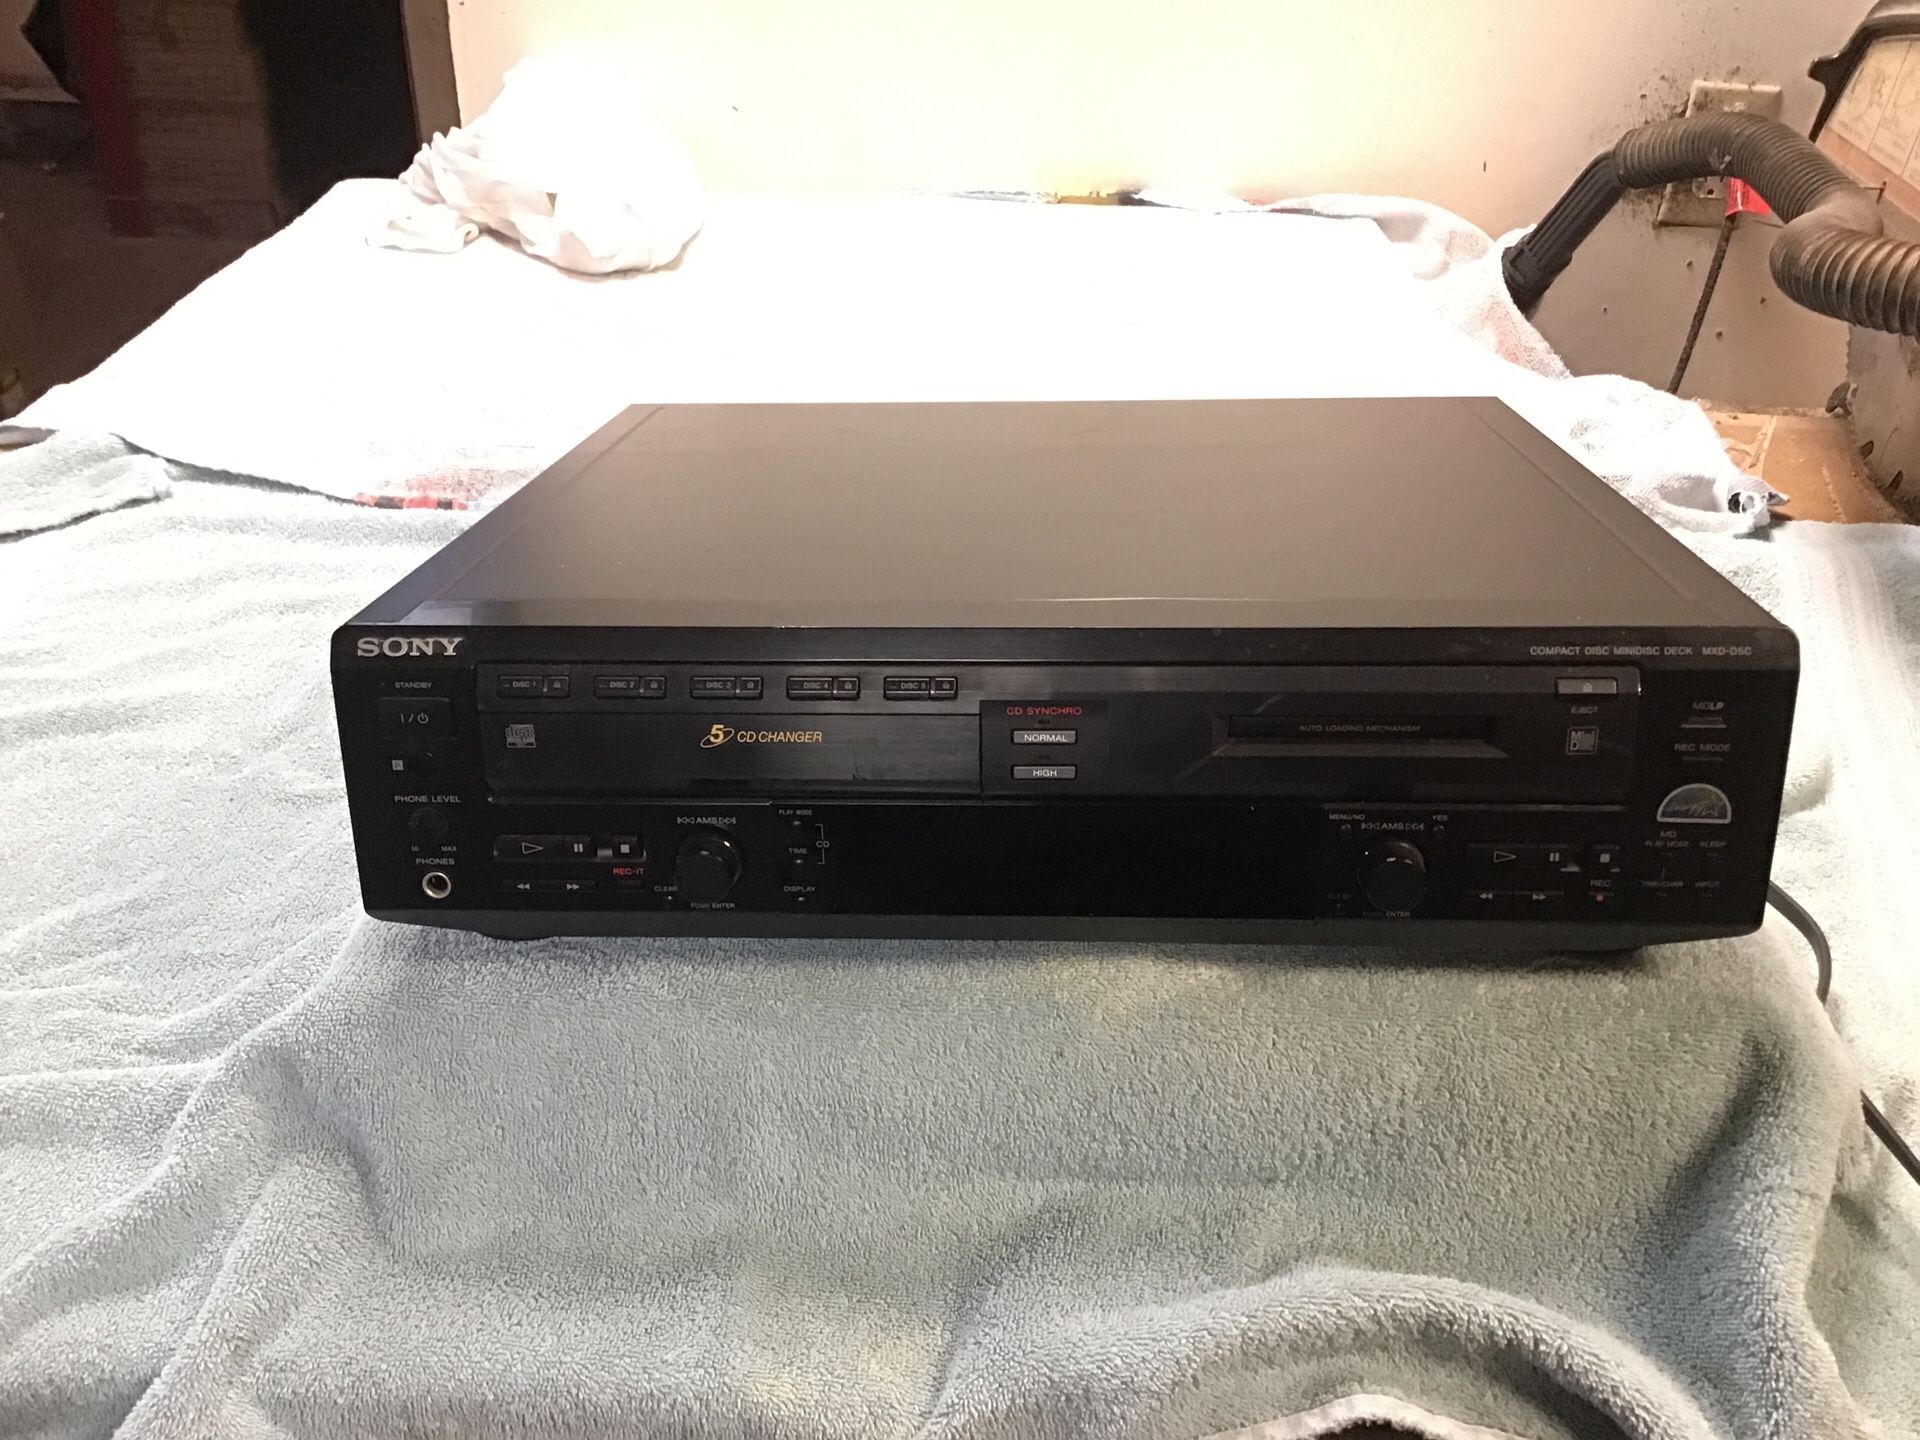 Sony MXD-D5C, CD player and recorder